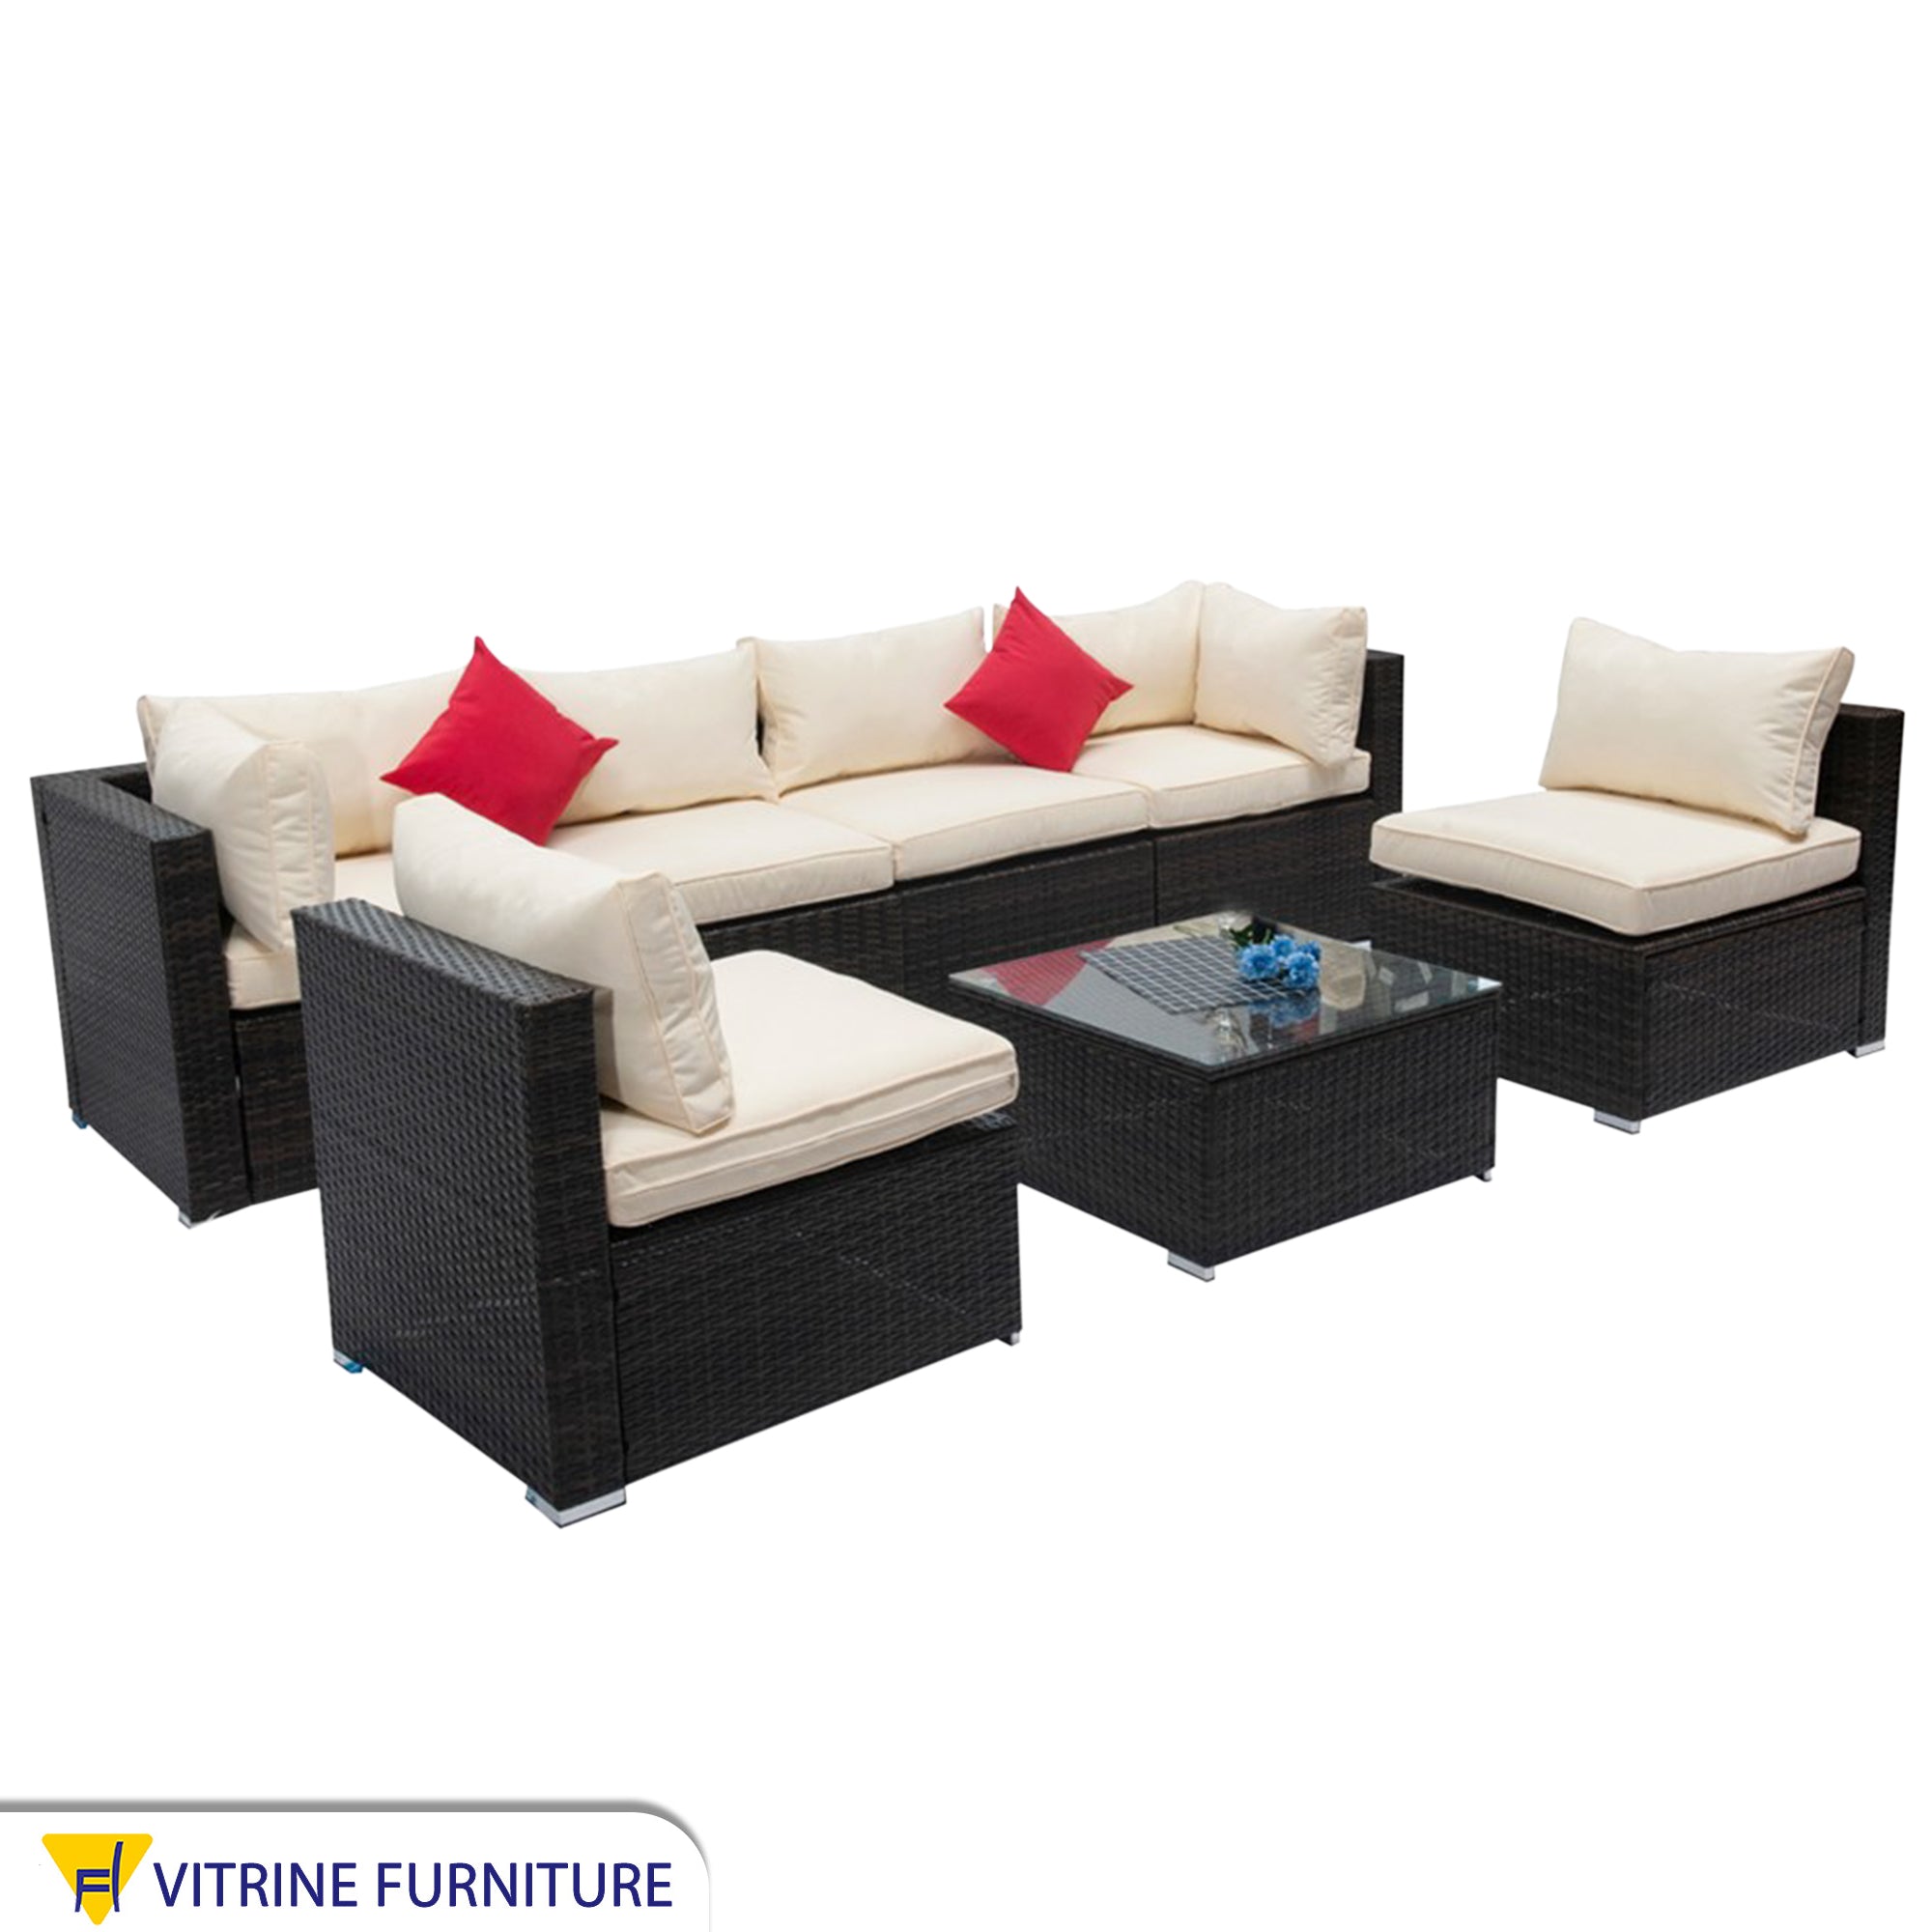 Complete outdoor VIP seating set